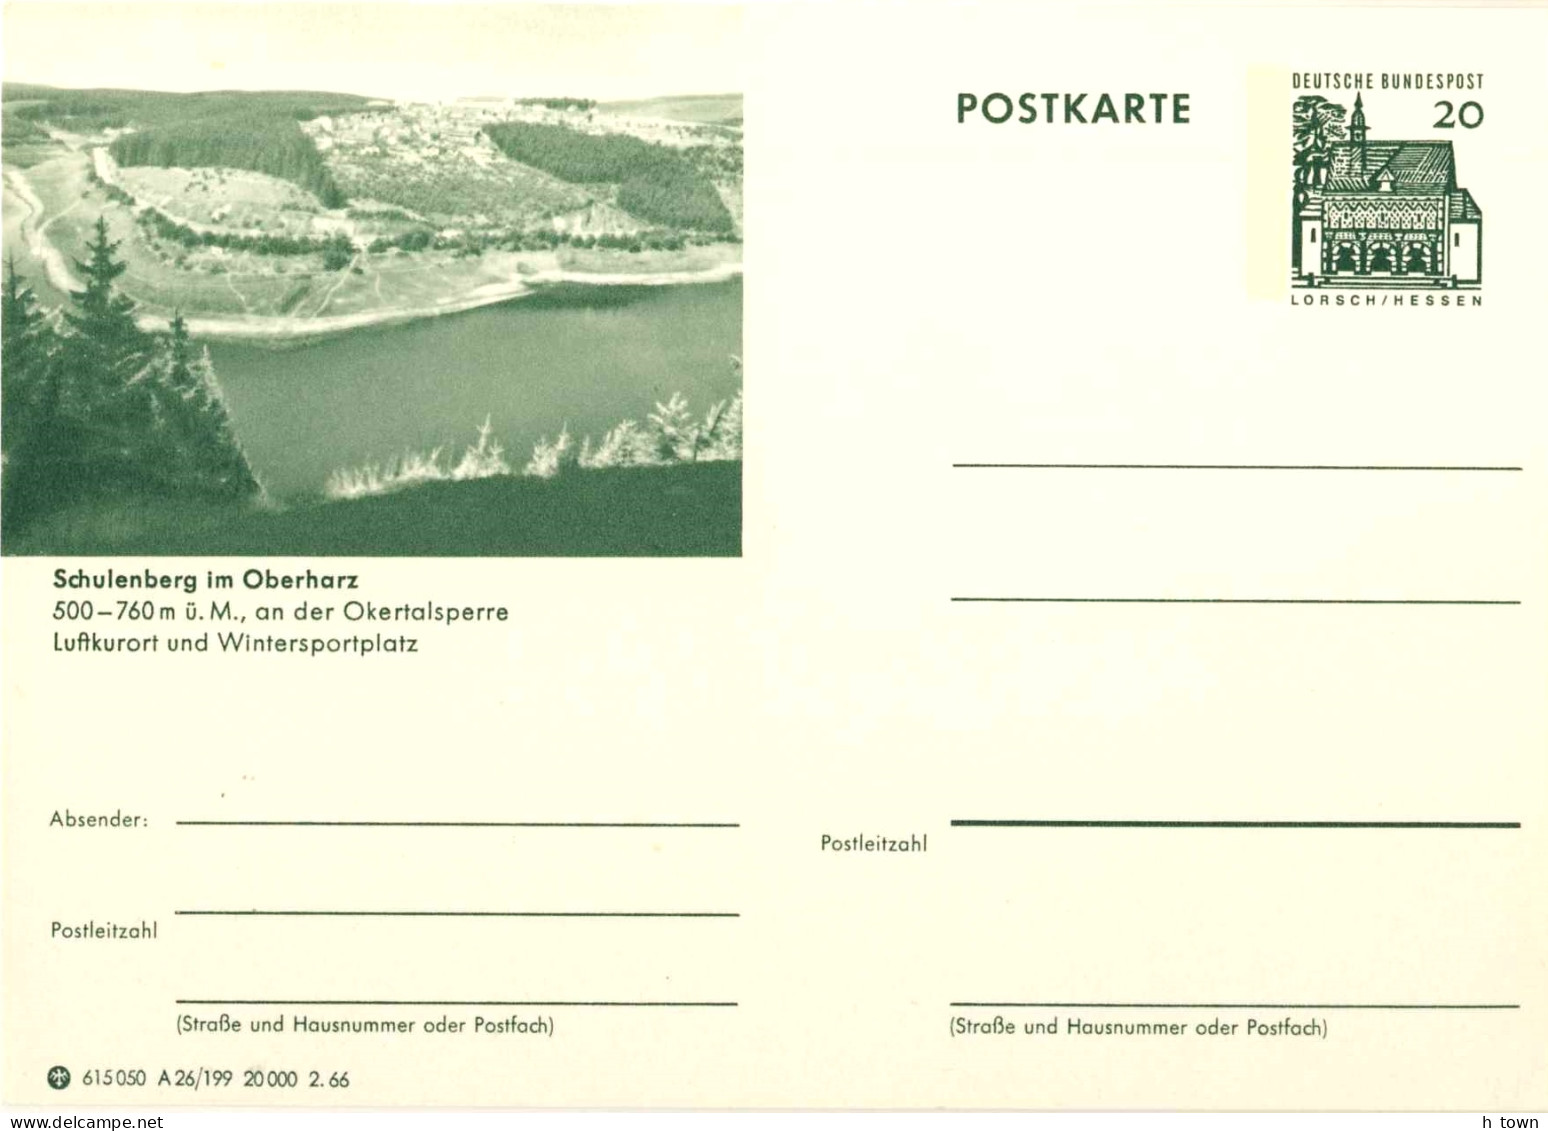 425  Barrage: Entier Postal (c.p.) D'Allemagne, 1966 - Dam, Lake Stationery Postcard From Germany. Winter Sports - Water